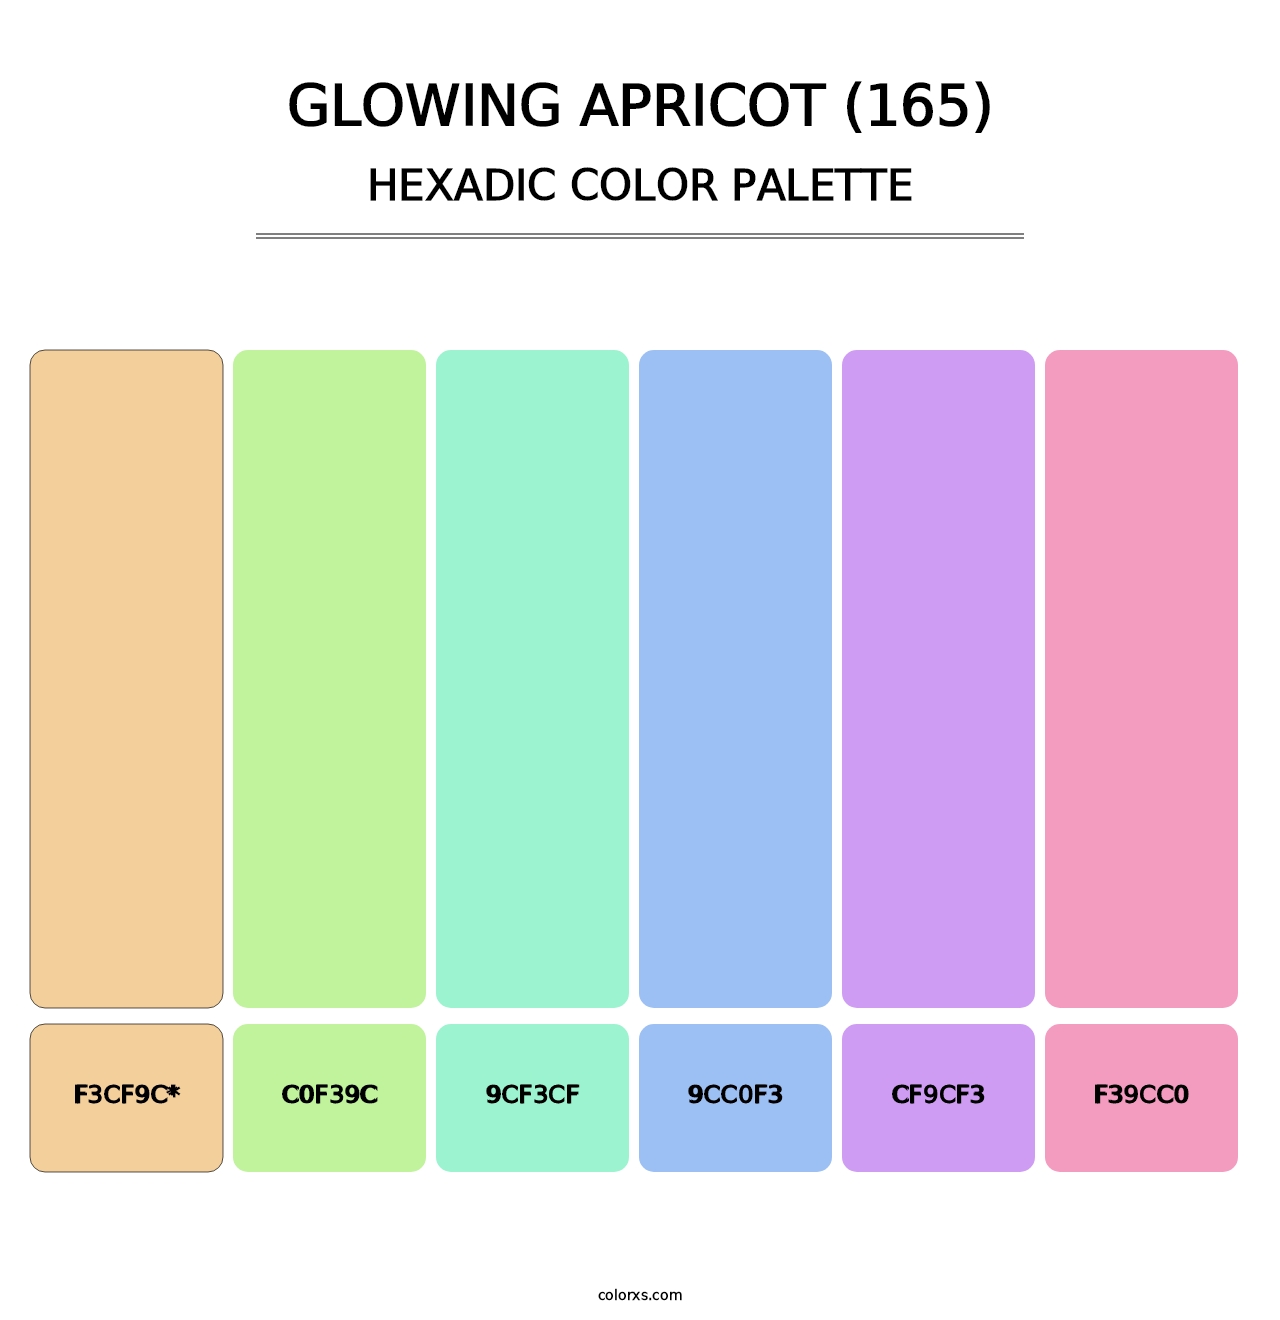 Glowing Apricot (165) - Hexadic Color Palette